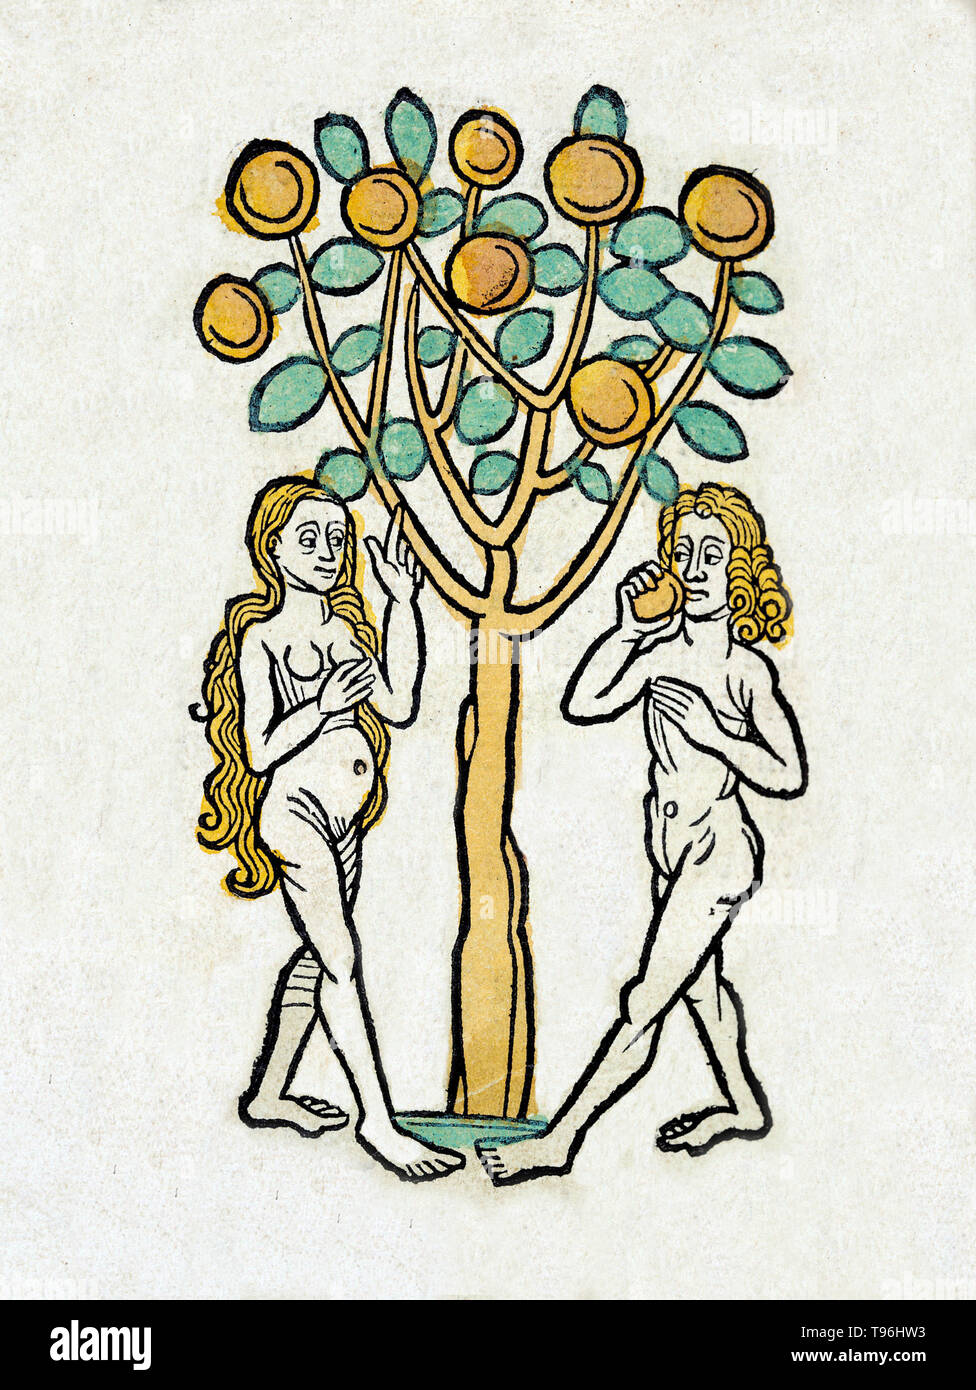 Adam and Eve, according to the creation myth of Abrahamic religions, were the first man and woman. The story of Adam and Eve is central to the belief that God created human beings to live in a Paradise on earth, although they fell away from that state and formed the present world full of suffering and injustice. It provides much of the scriptural basis for the doctrine of Original Sin, an important belief in Christianity, although not shared by Judaism or Islam. Stock Photo